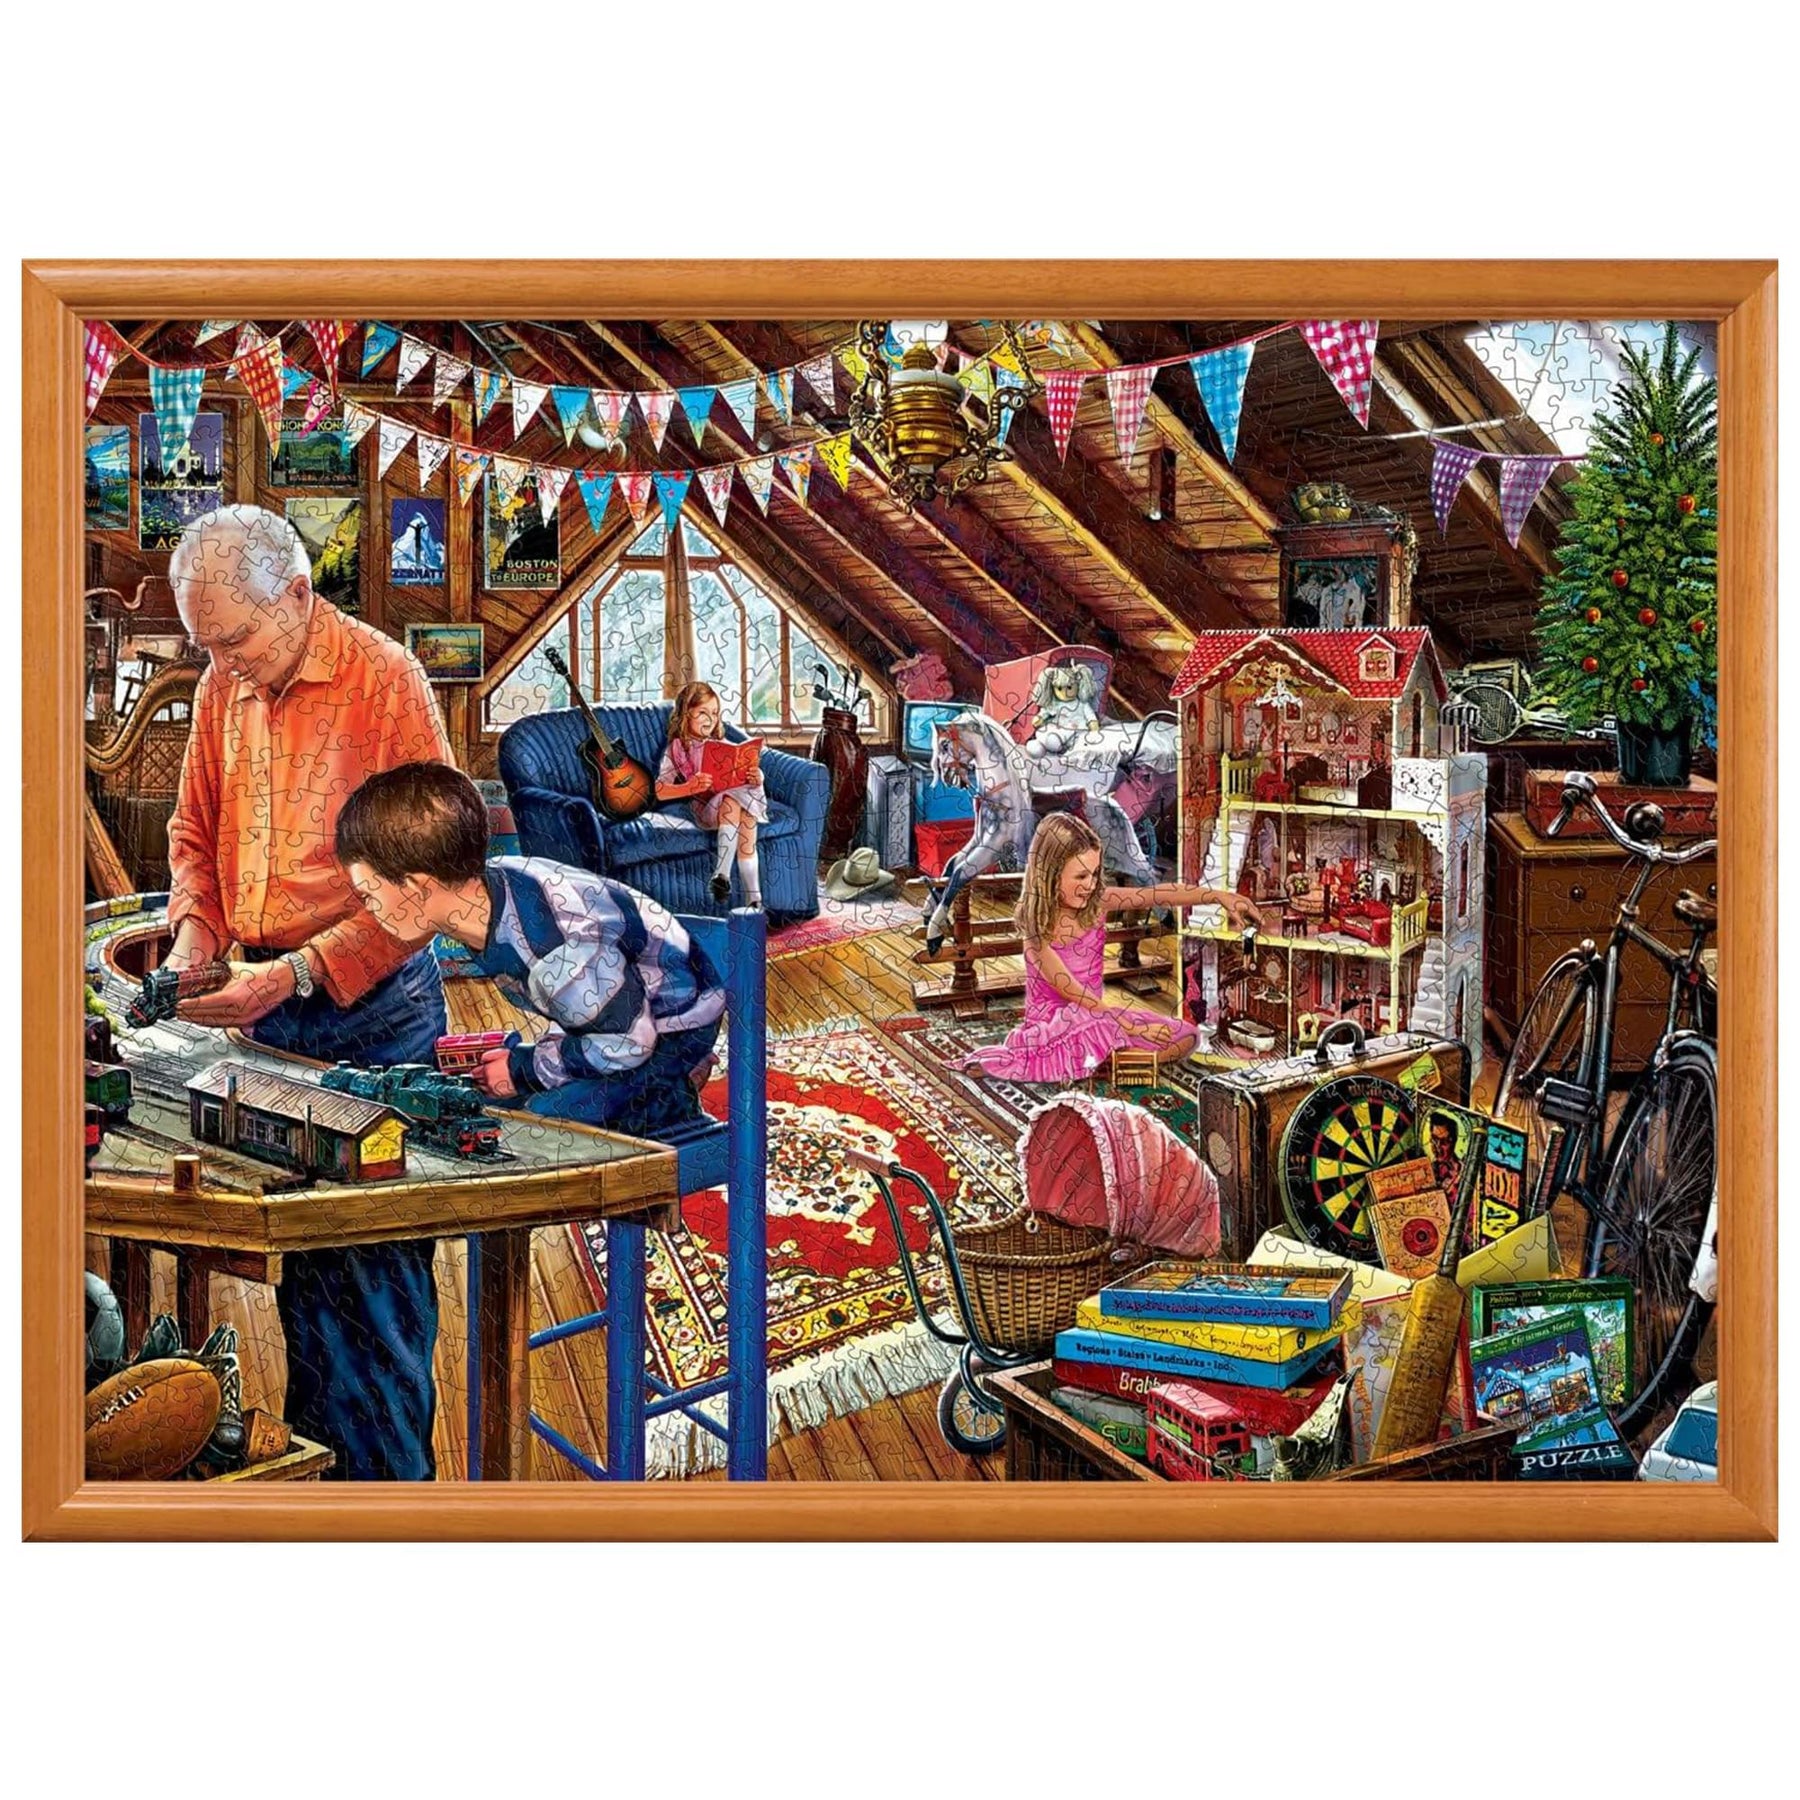 Childhood Dreams Playtime in the Attic 1000 Piece Jigsaw Puzzle